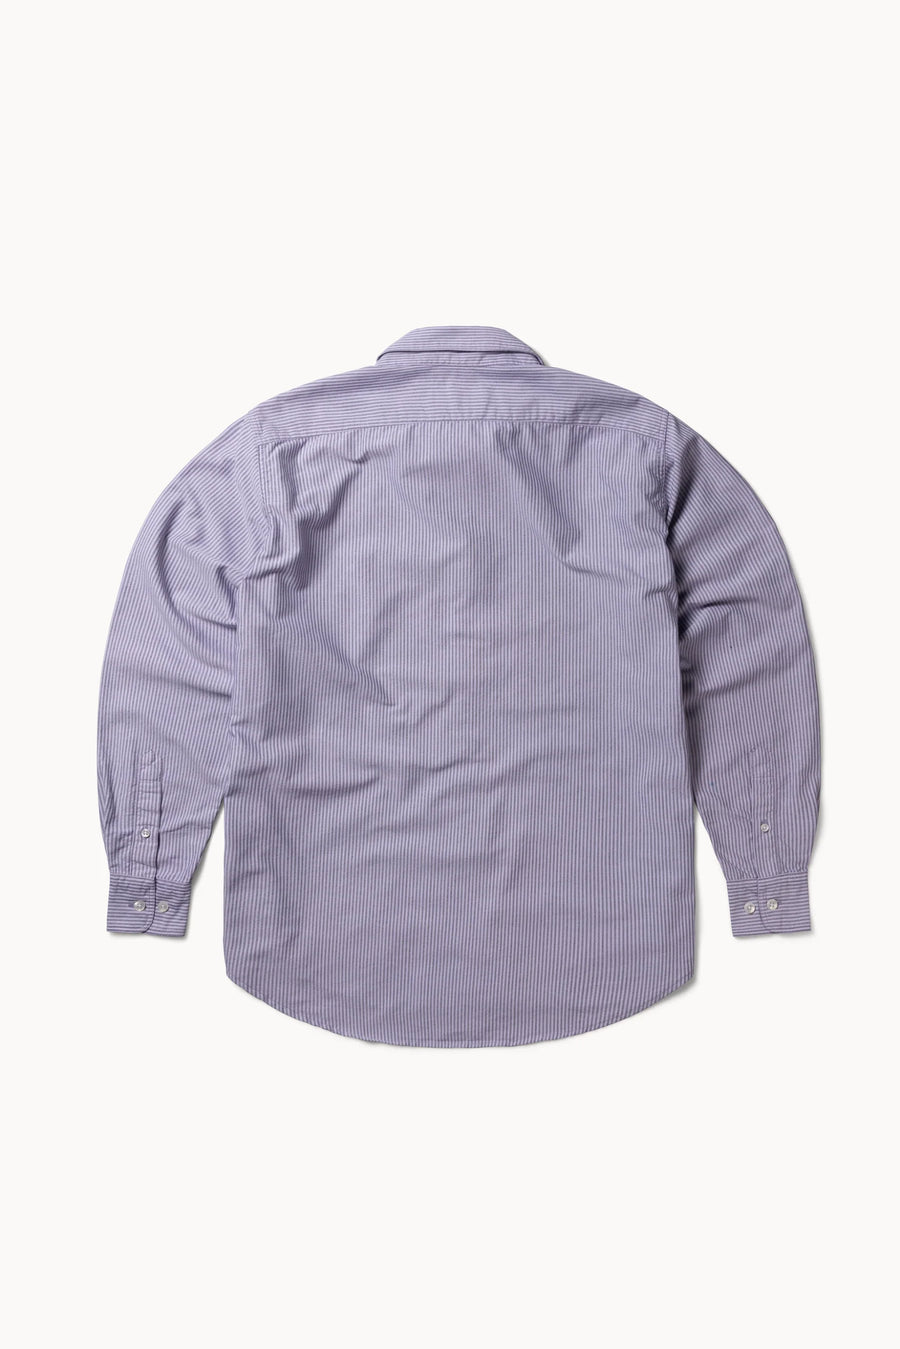 ARIES OVERDYED OXFORD STRIPE LS SHIRT - LILAC